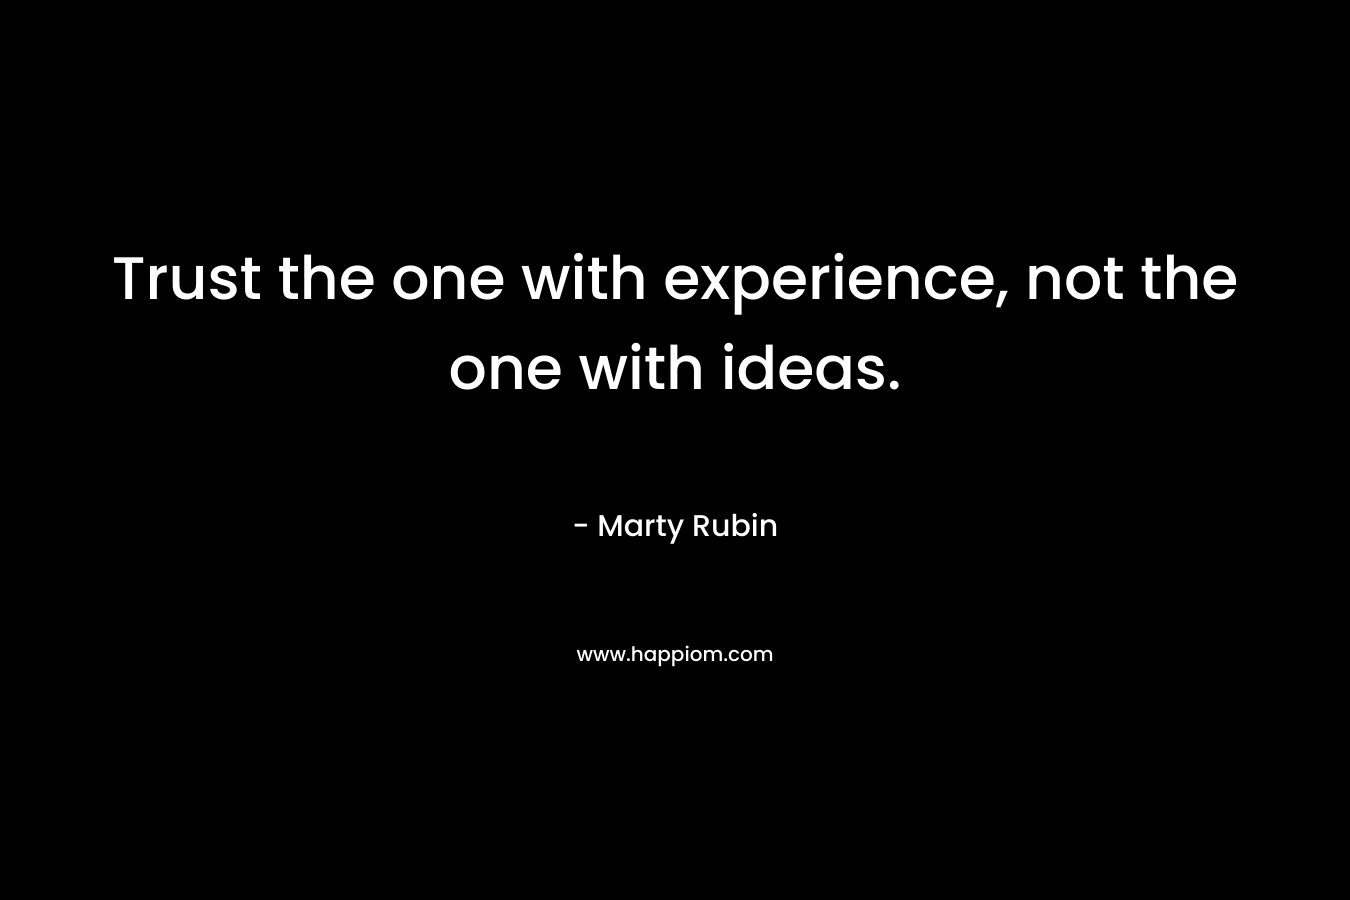 Trust the one with experience, not the one with ideas.